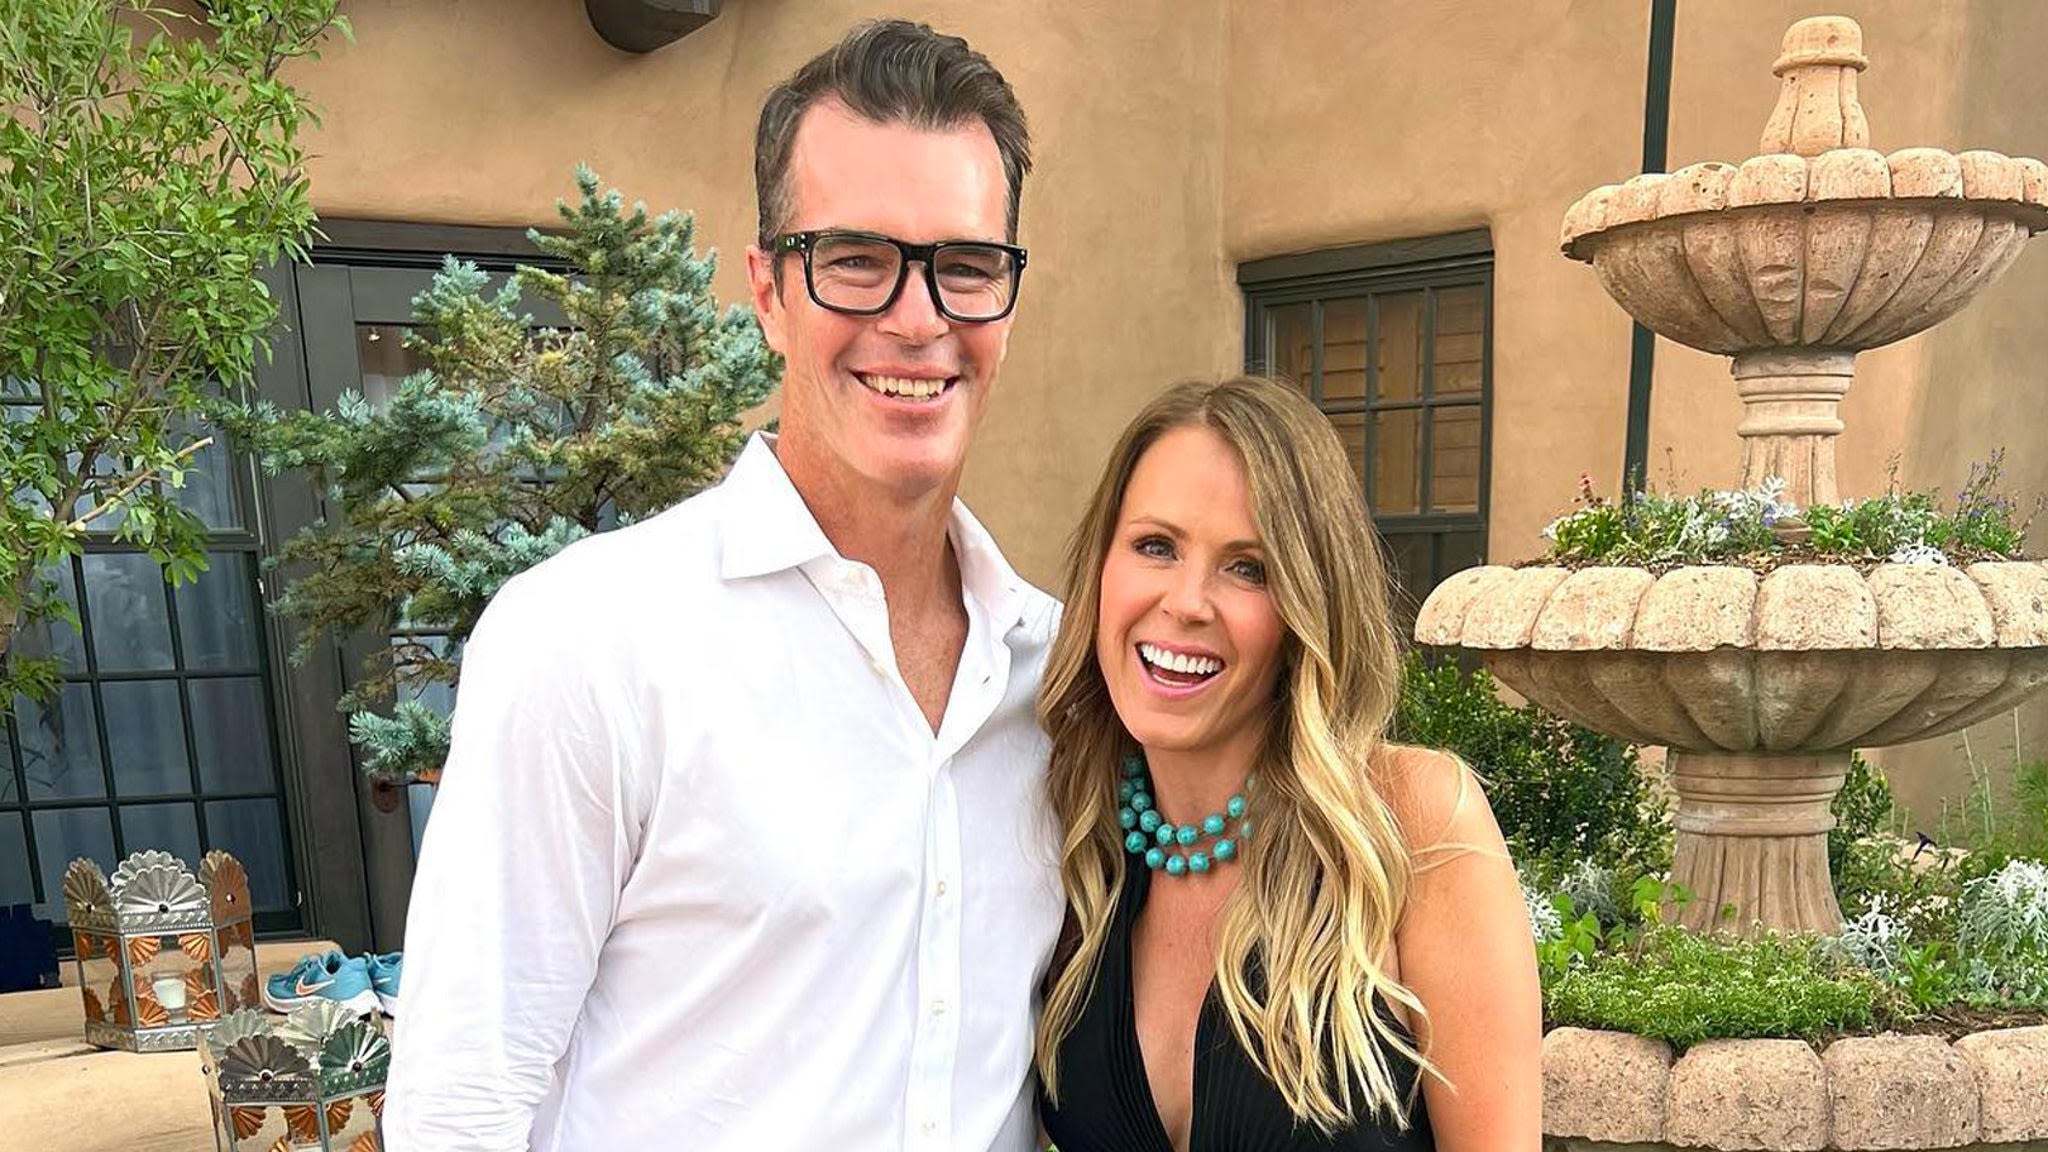 Trista Sutter Speaks Out After Ryan's Cryptic Posts About Missing Her, Addresses Her Absence